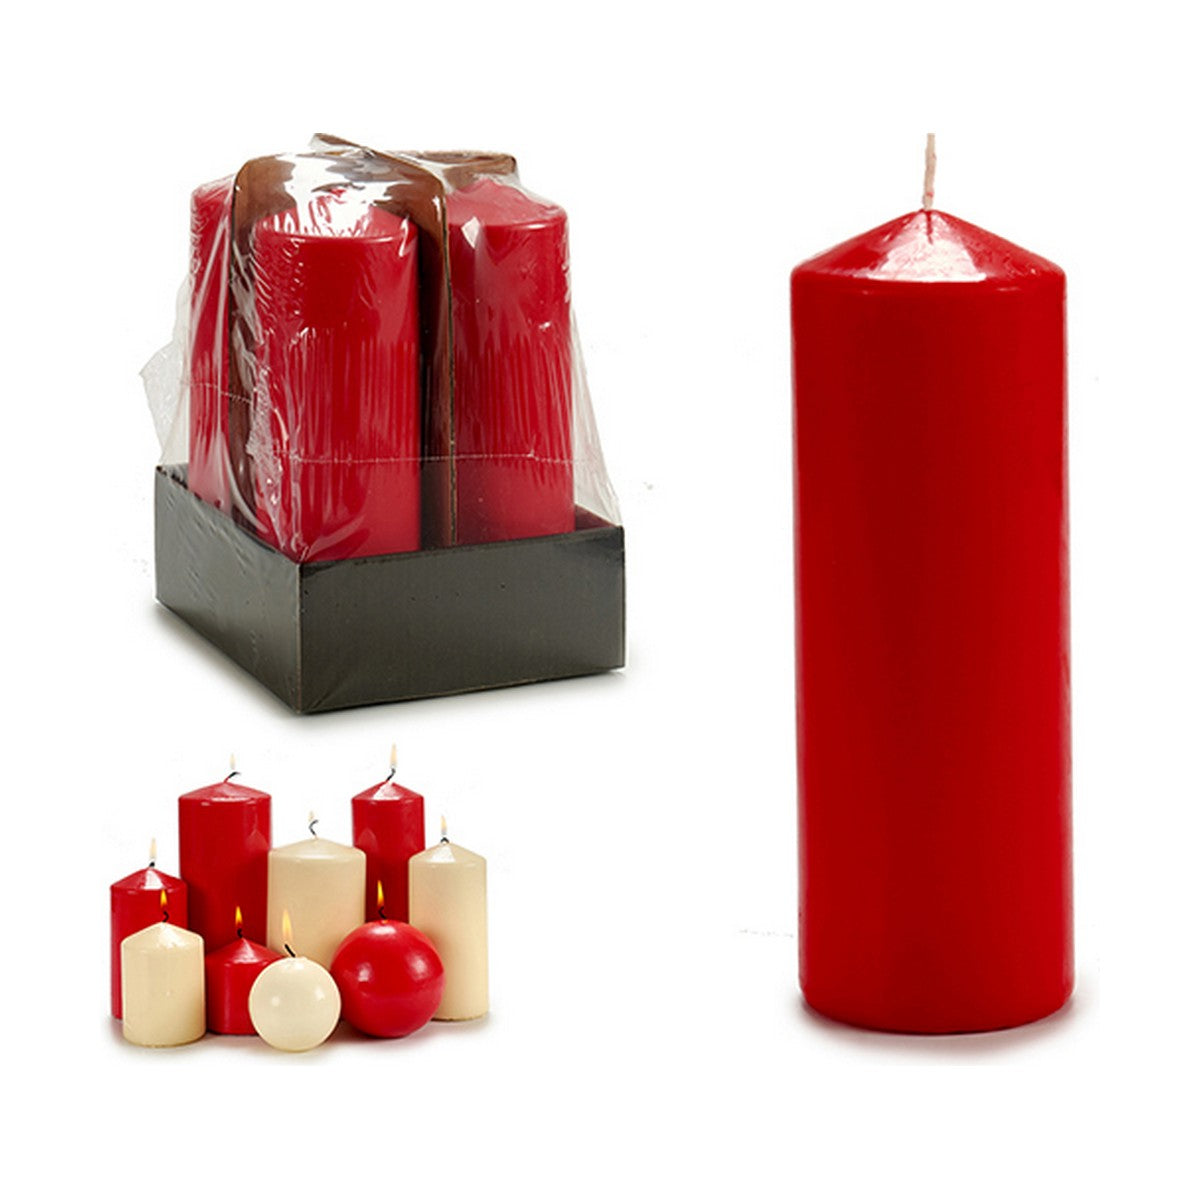 Candle 20 cm Red Wax (4 Units)